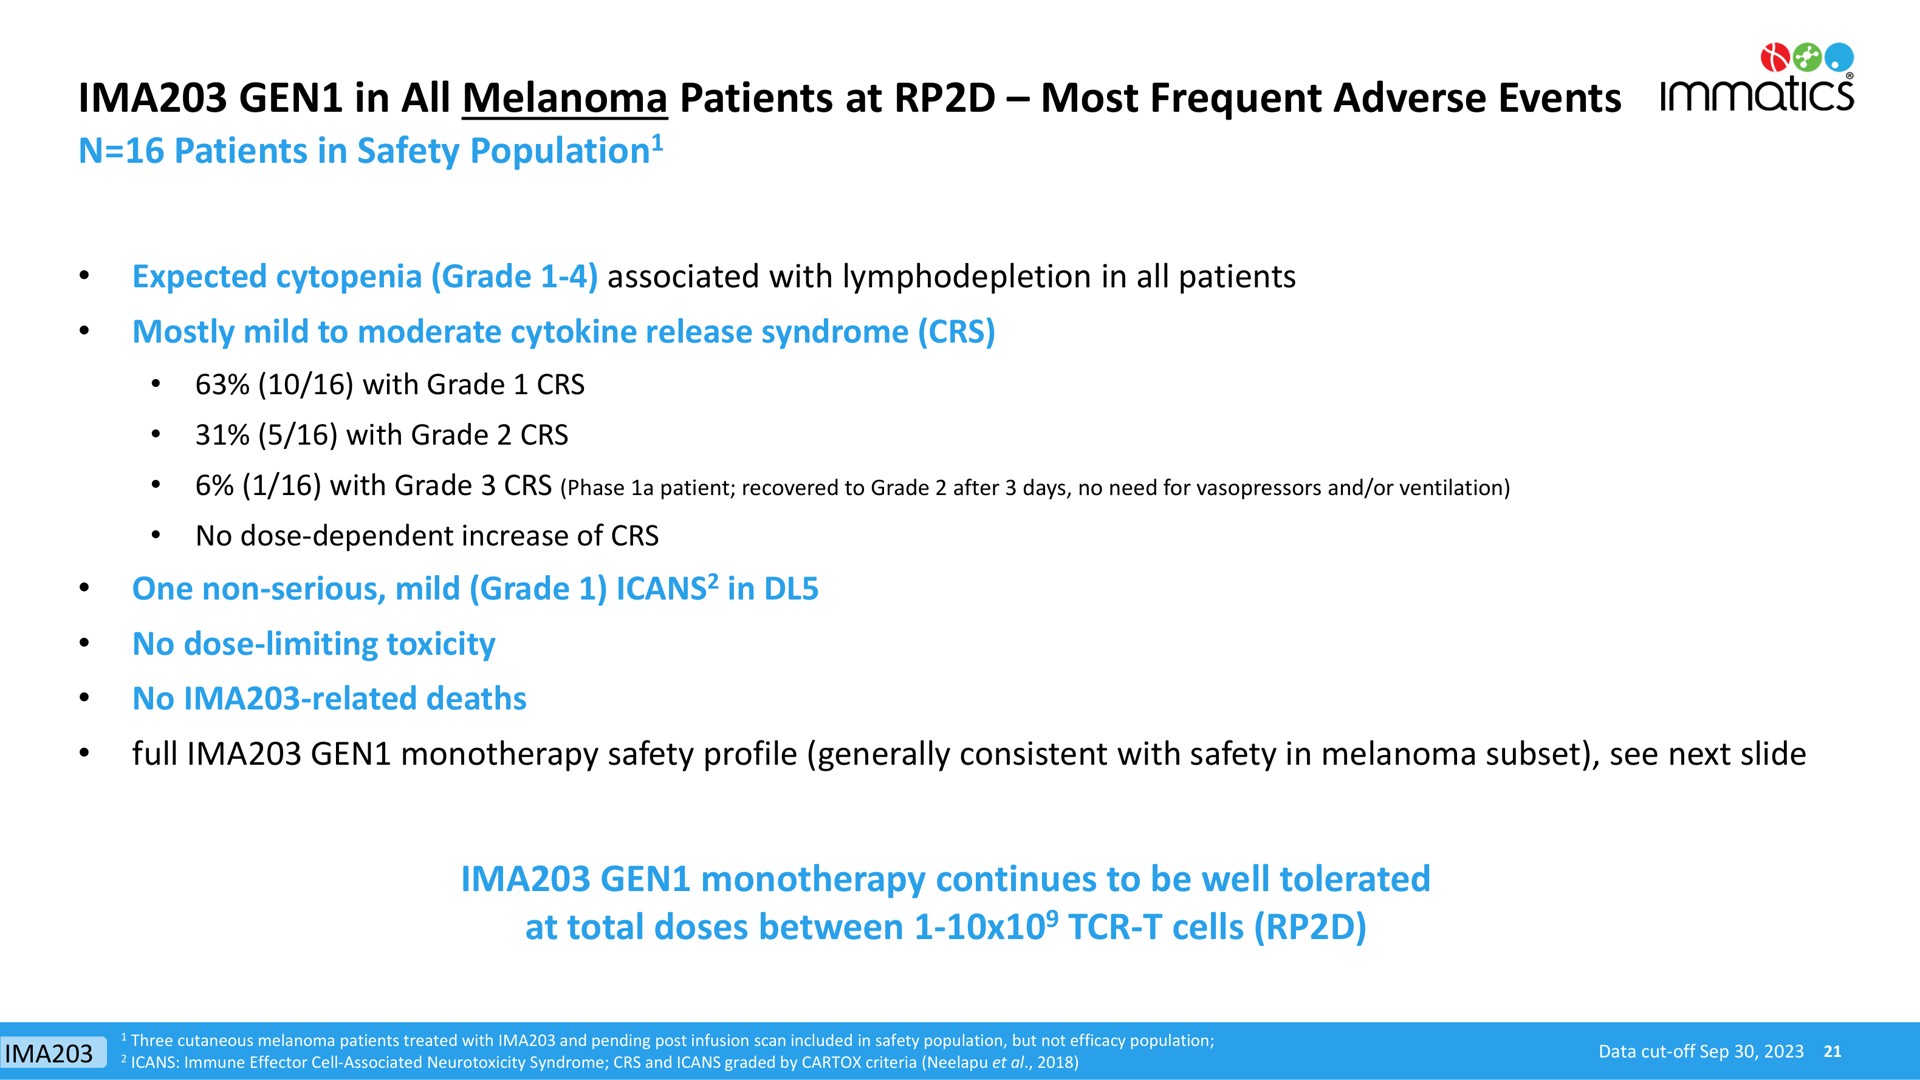 gen in all melanoma patients at most frequent adverse events so | Immatics